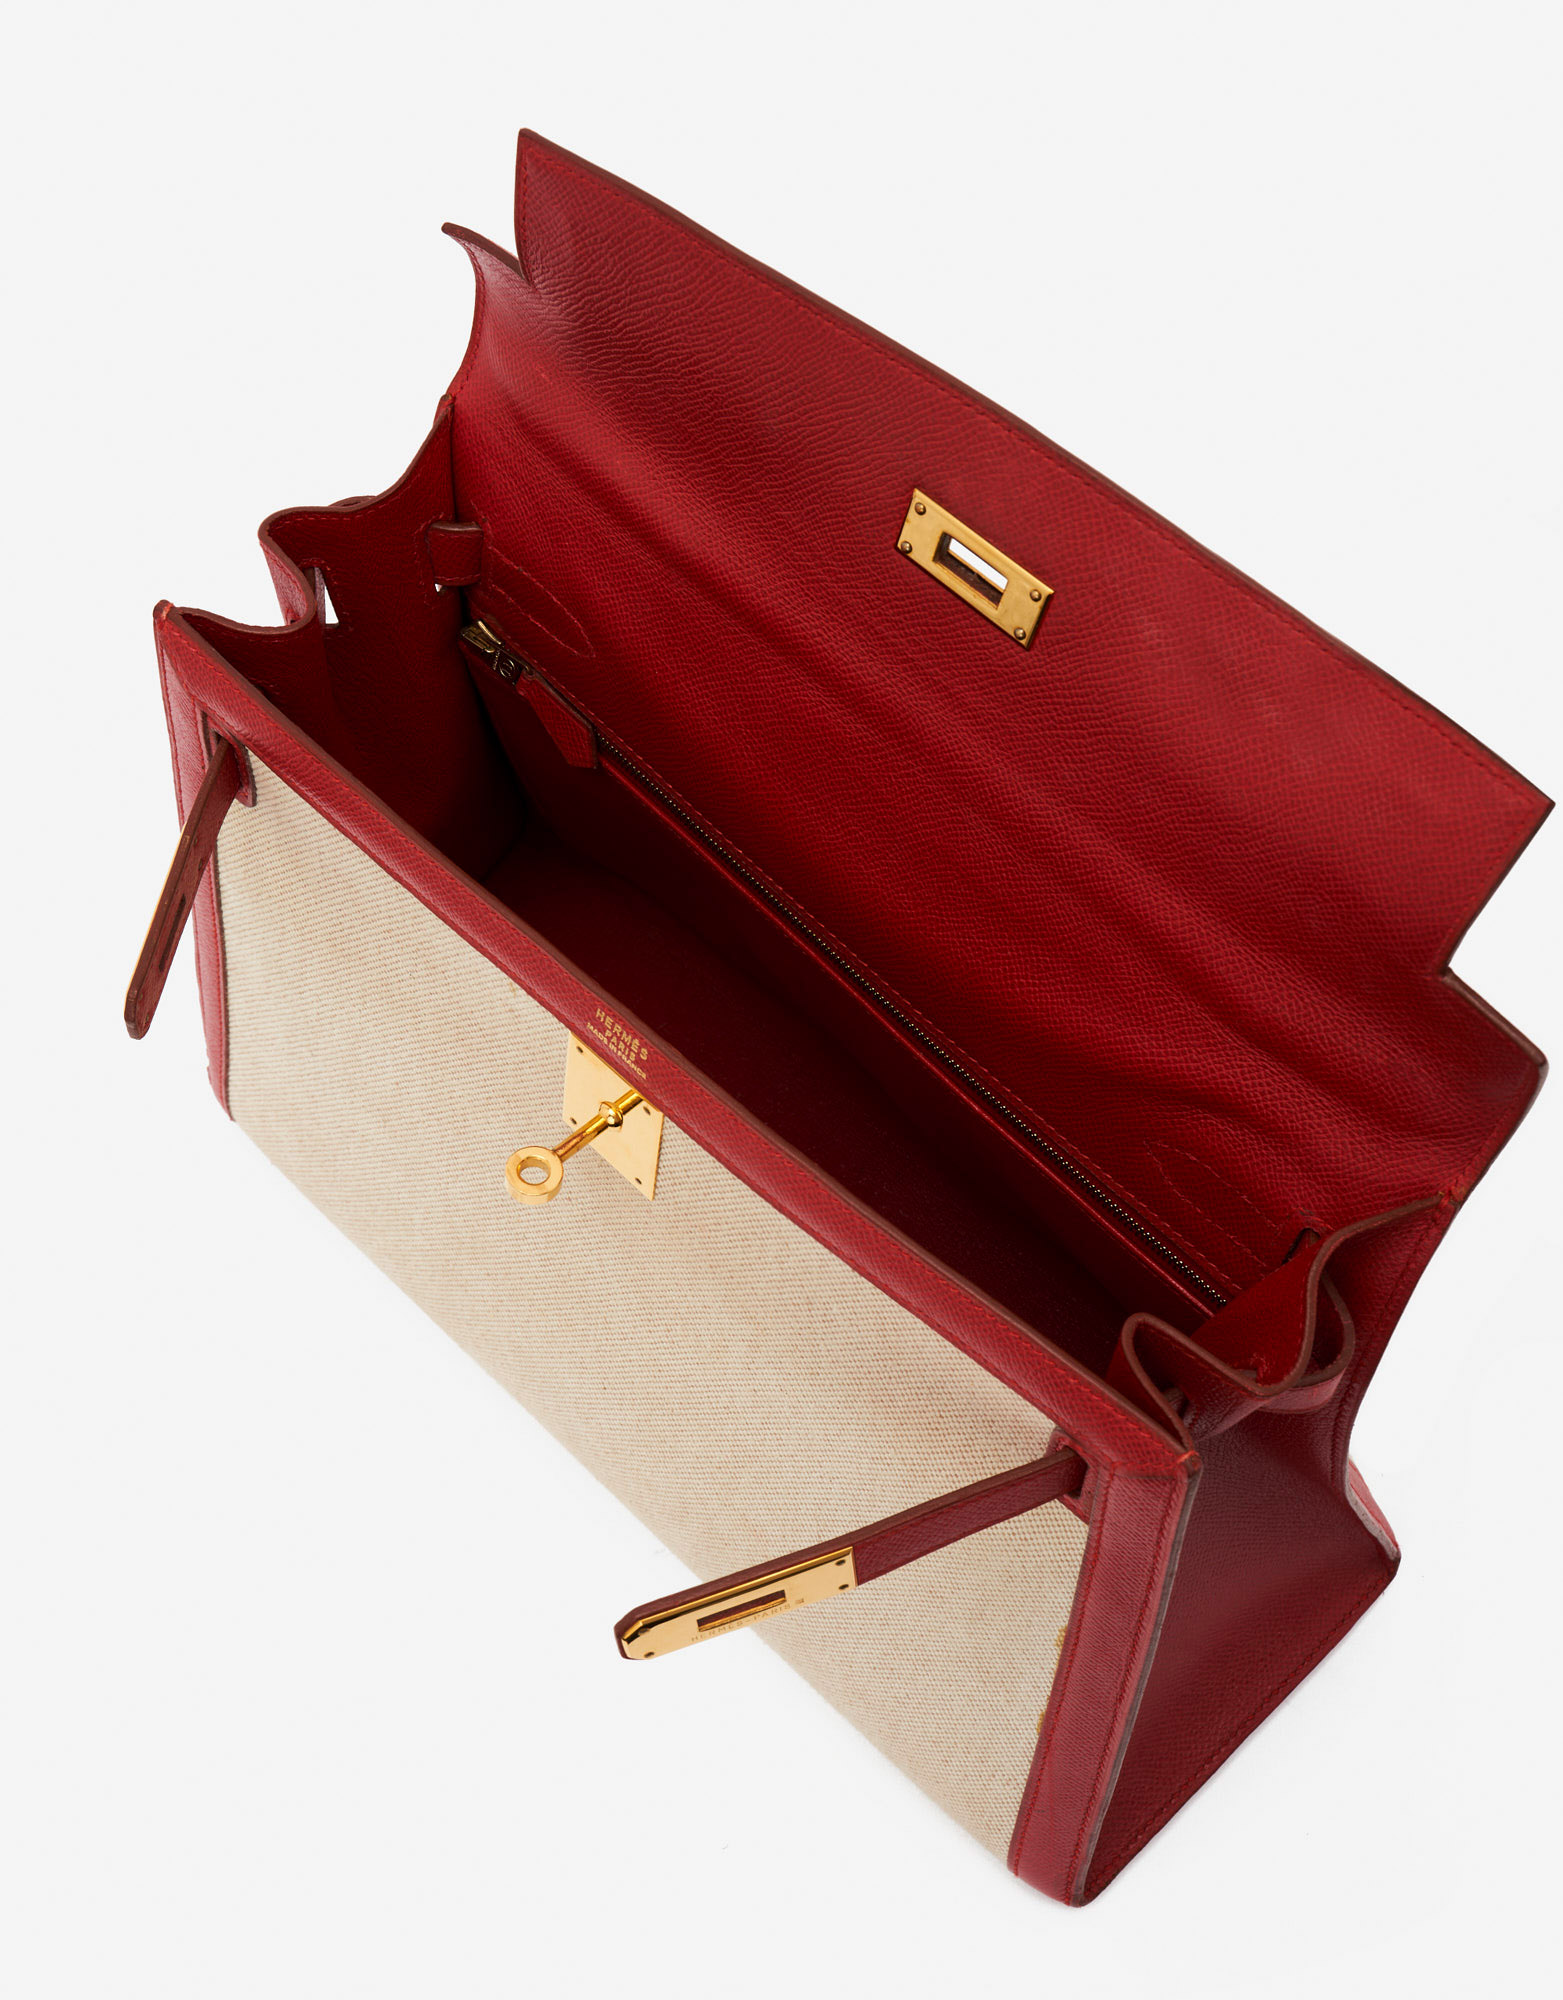 Hermes Kelly 32 cm Handbag in Red Courchevel Leather